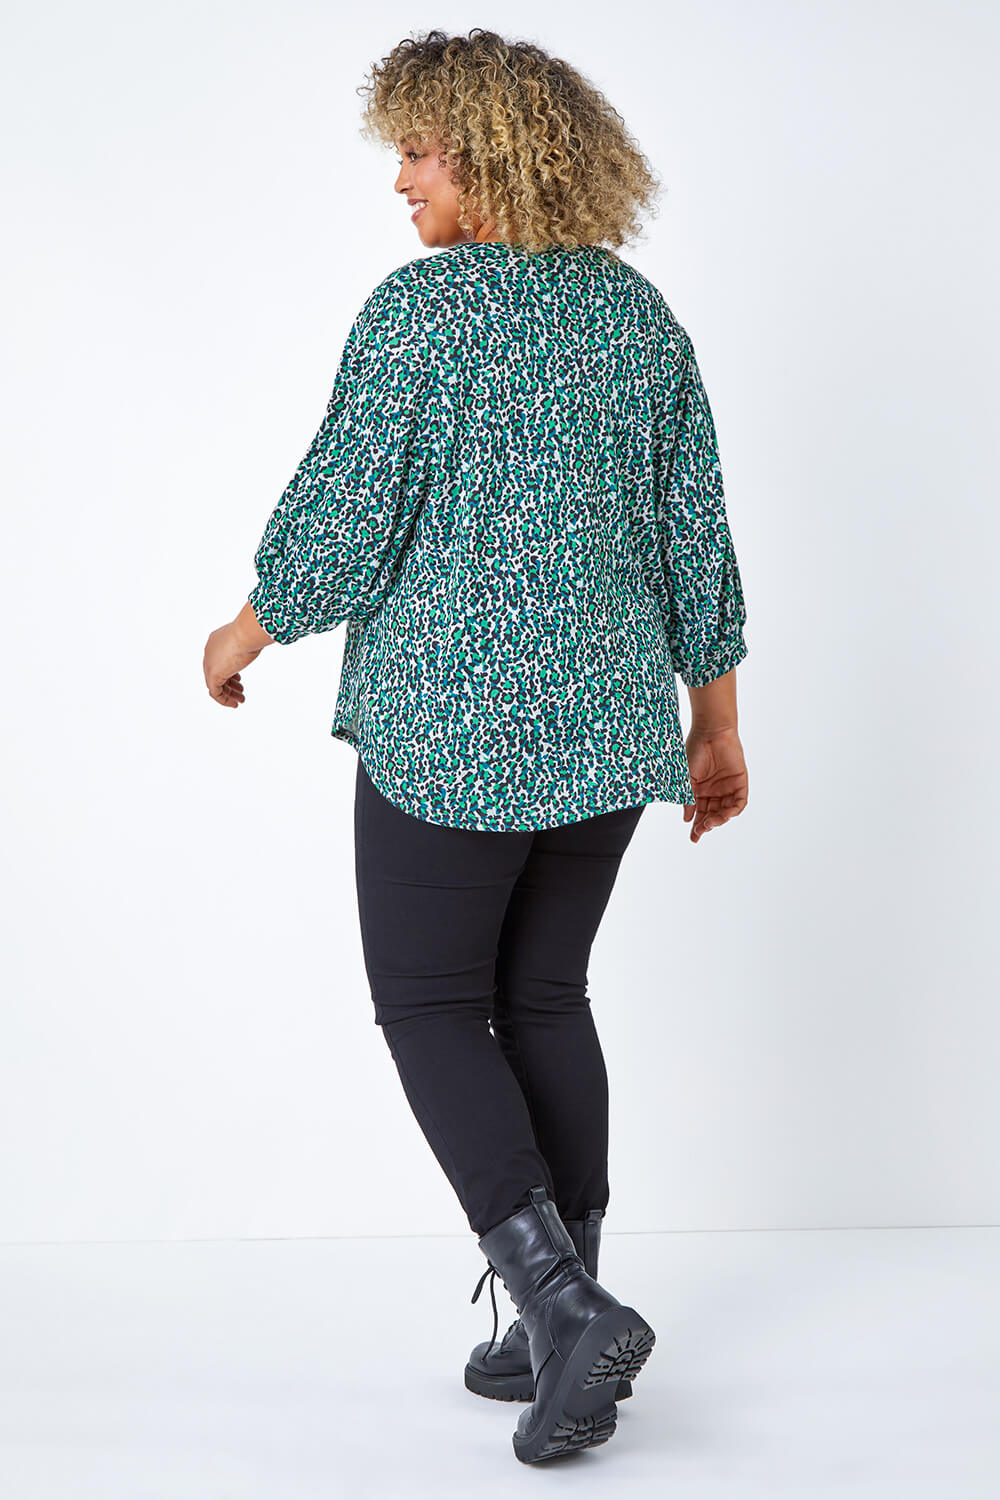 Green Curve Animal Print Stretch Top, Image 3 of 7